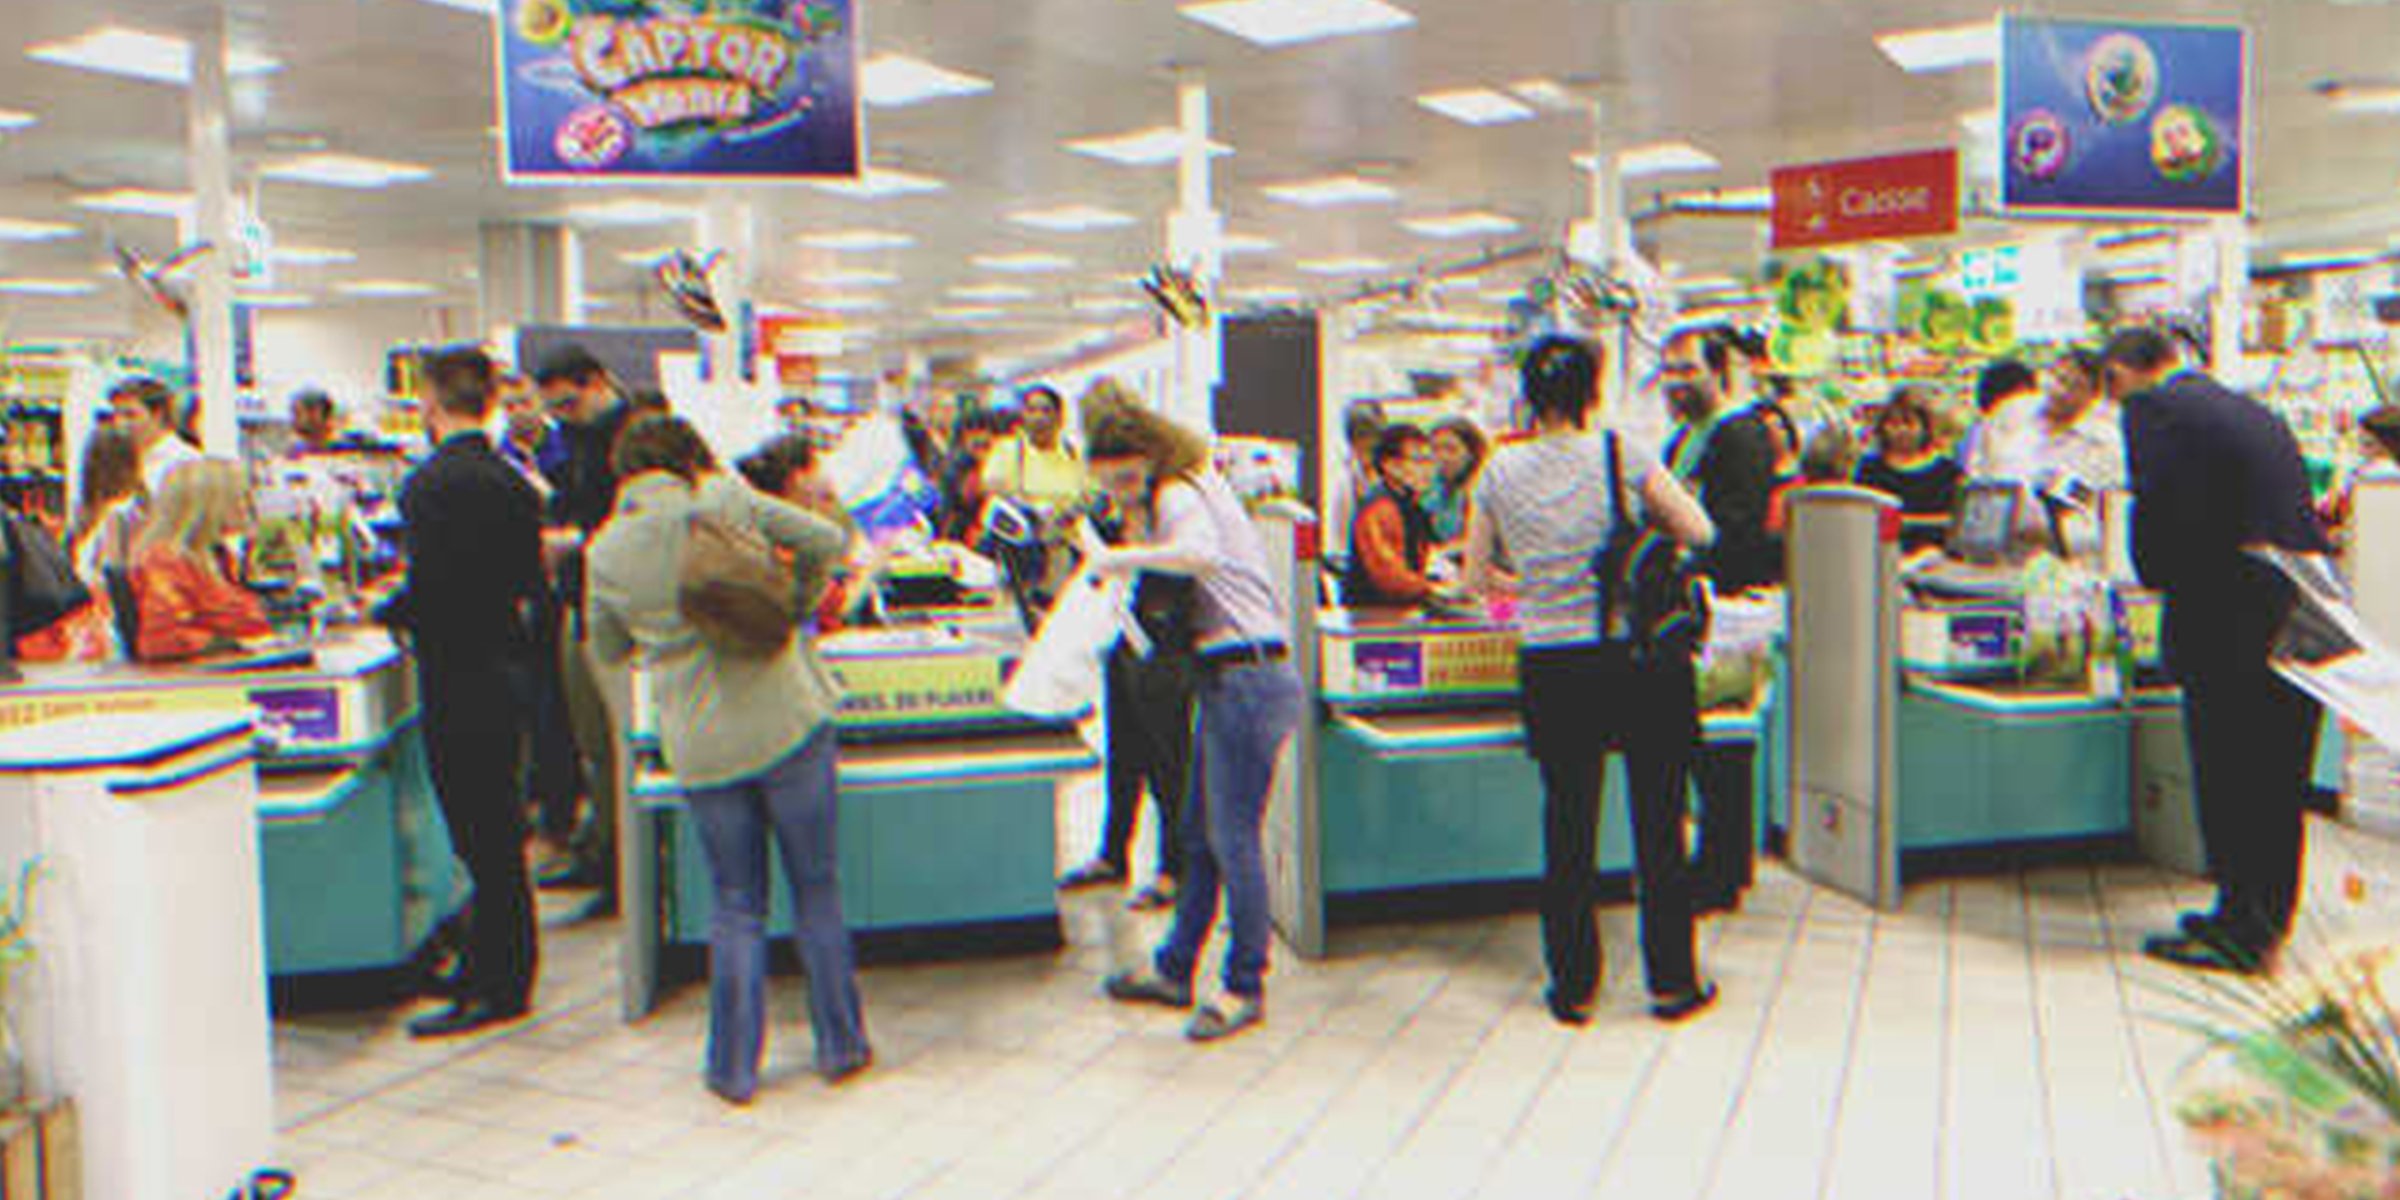 A crowded supermarket. | Source: Shutterstock